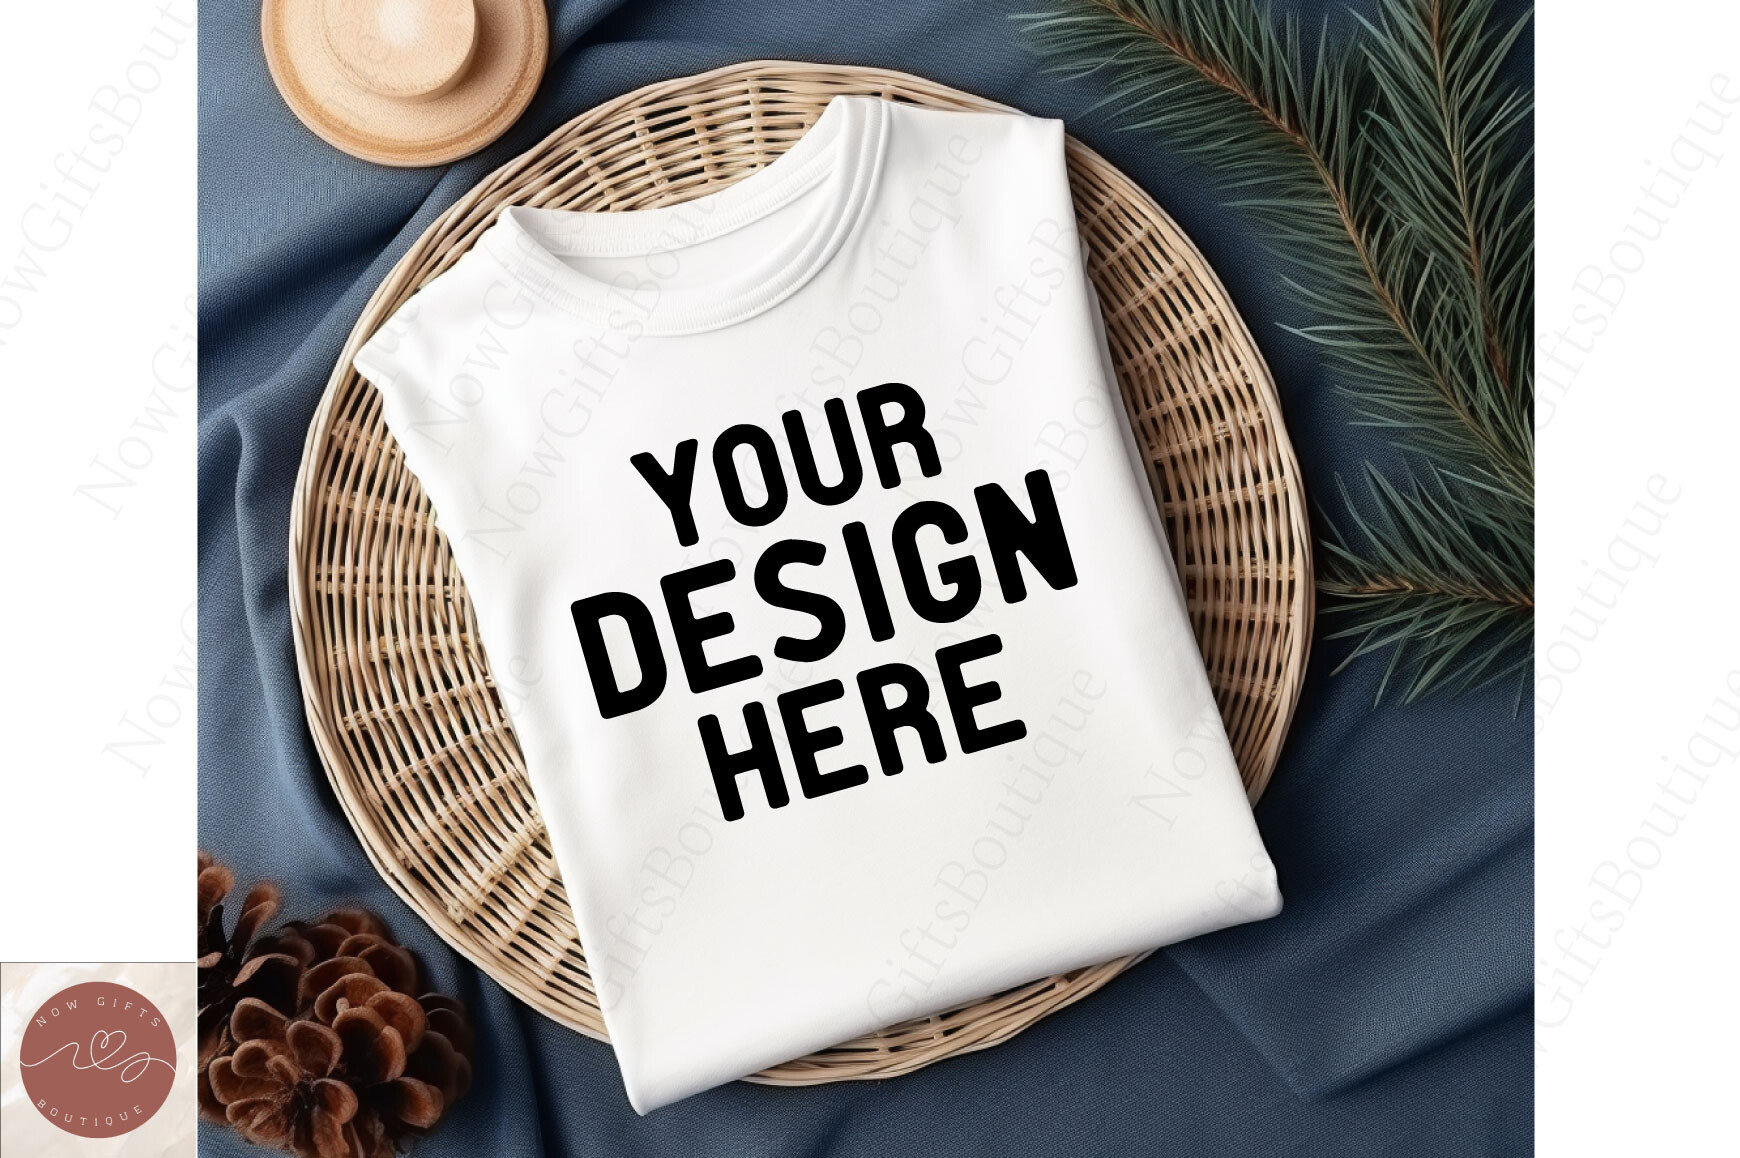 Gildan 18000 Christmas Tshirt Mockup Graphic by NowGiftsBoutique ...